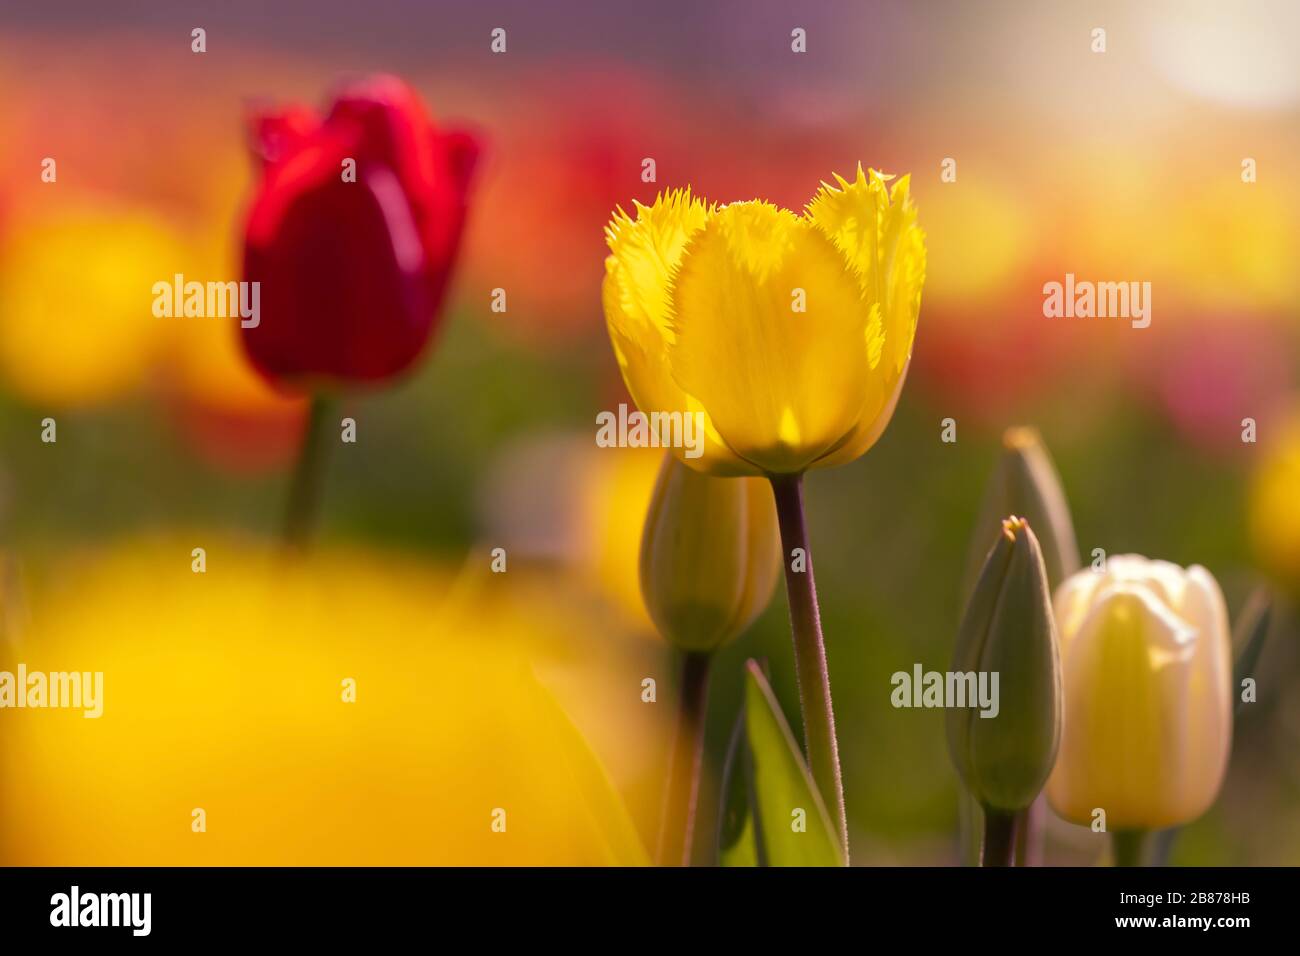 Tulip field with yellow and red tulips in backlight, Germany. Backlight photography Stock Photo